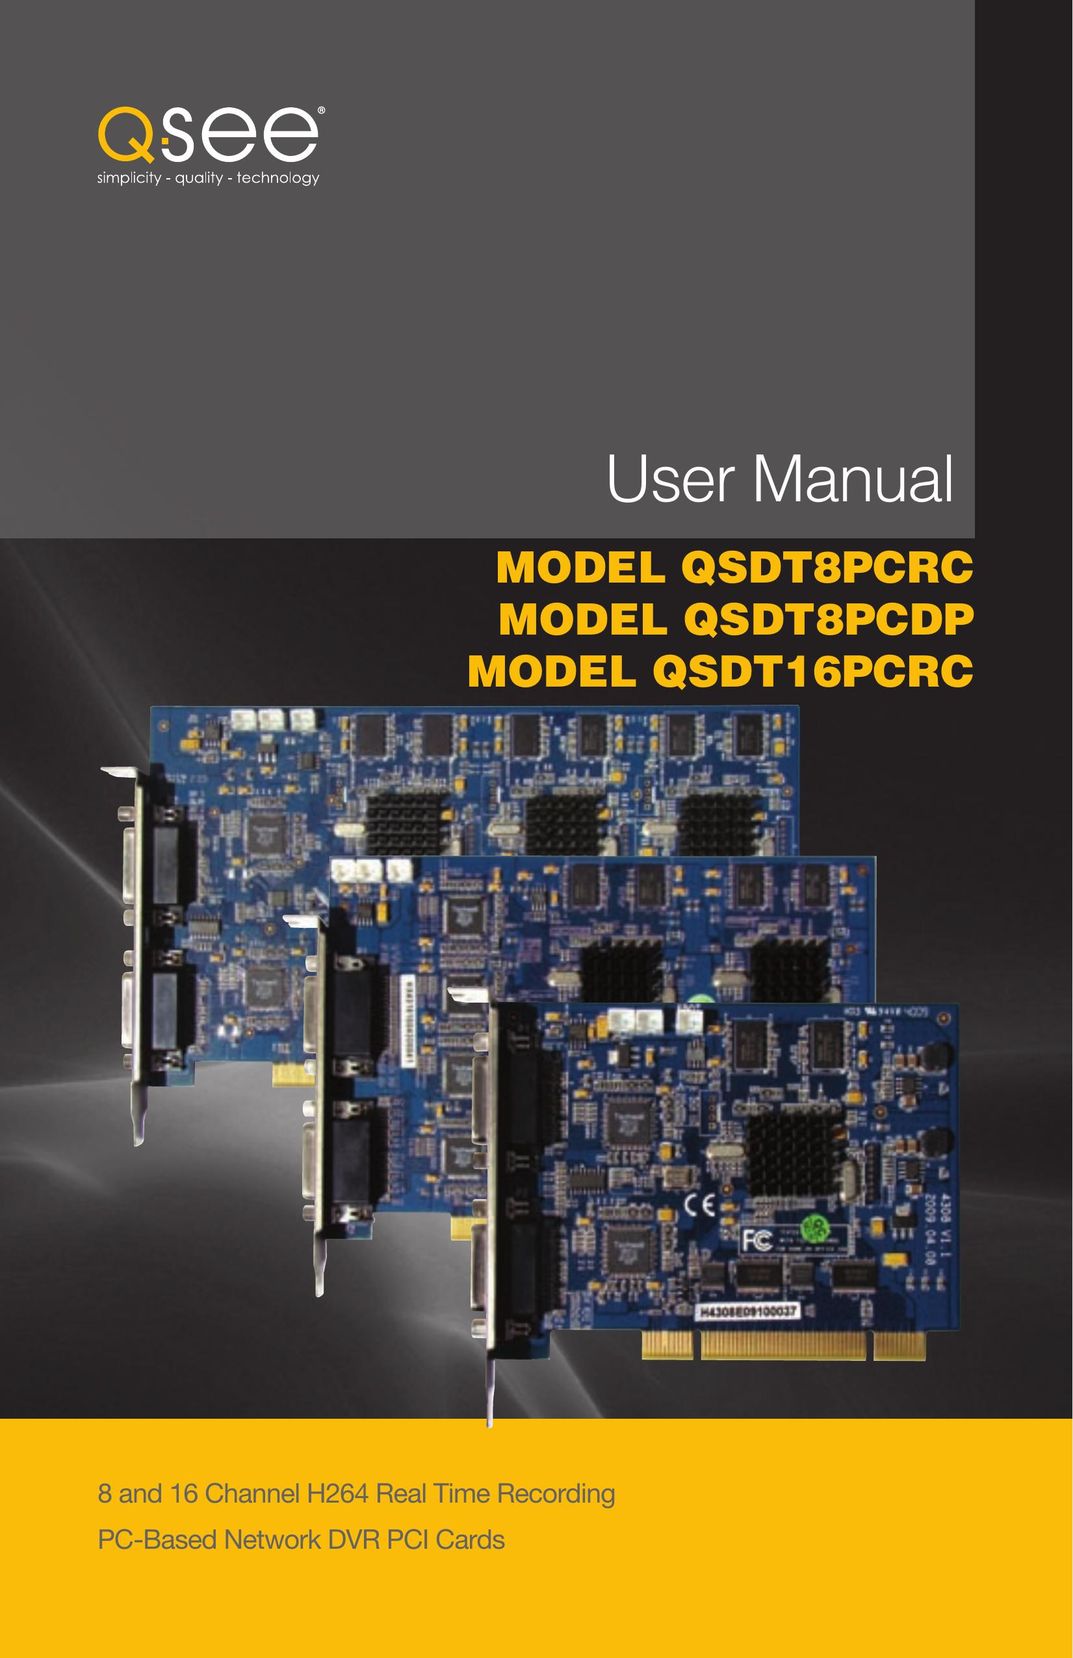 Q-See QSDT8PCDP Computer Hardware User Manual